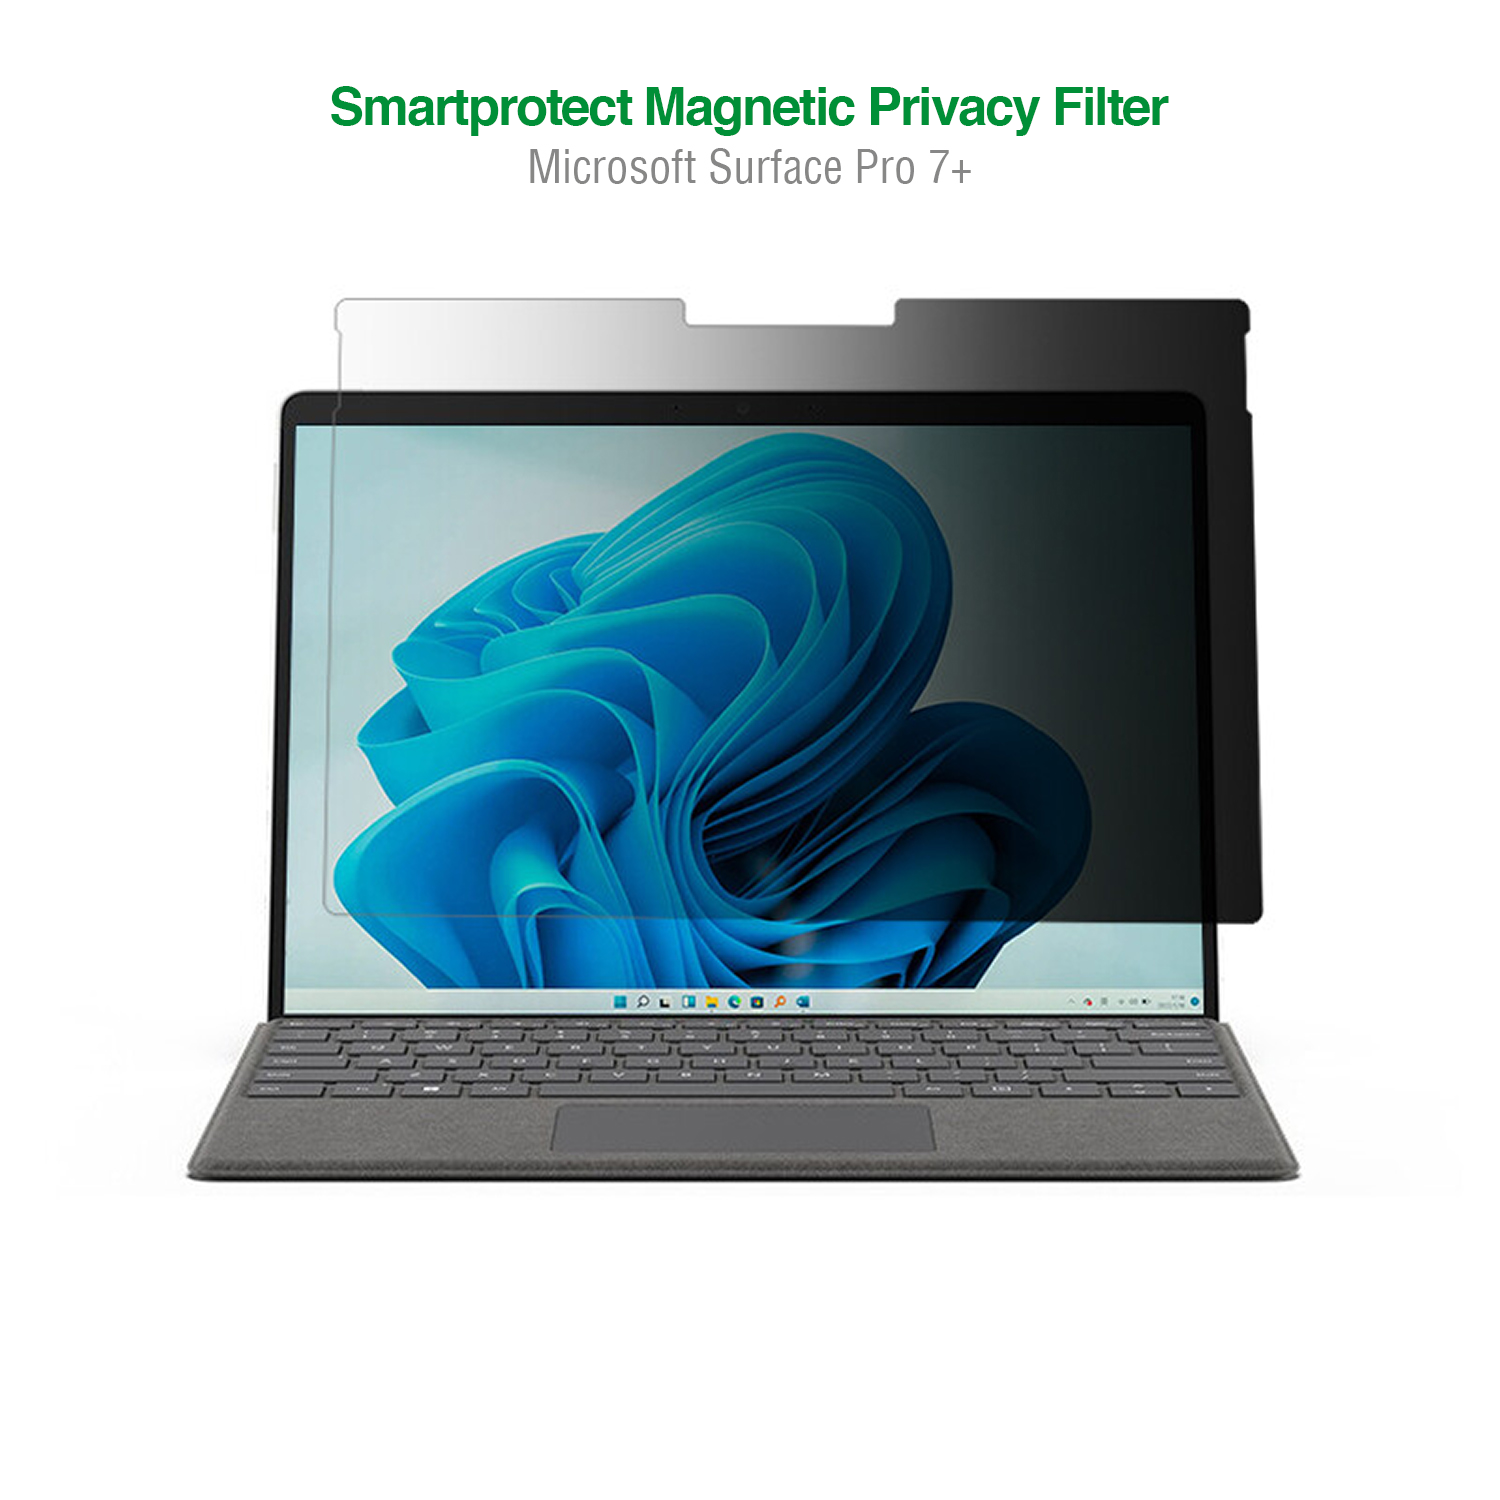 The mounting material and cleaning cloth are already included in the scope of delivery in addition to the privacy screen protector for your Microsoft Surface Pro 7+.